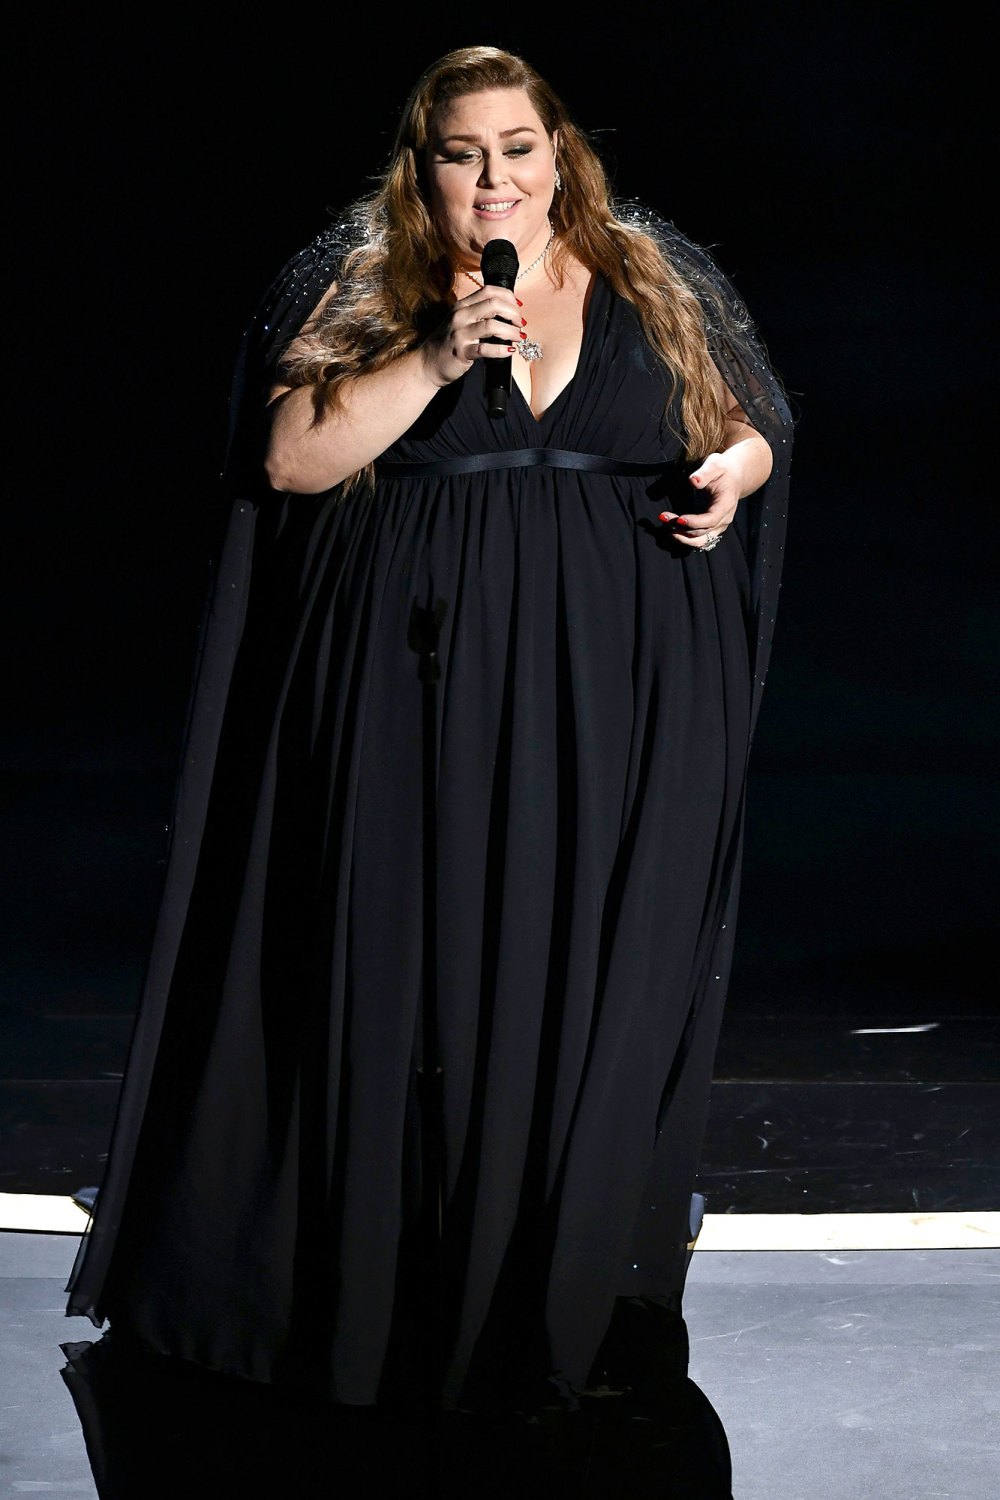 Chrissy Metz Performing I'm Standing With You 92nd Annual Academy Awards Oscars 2020